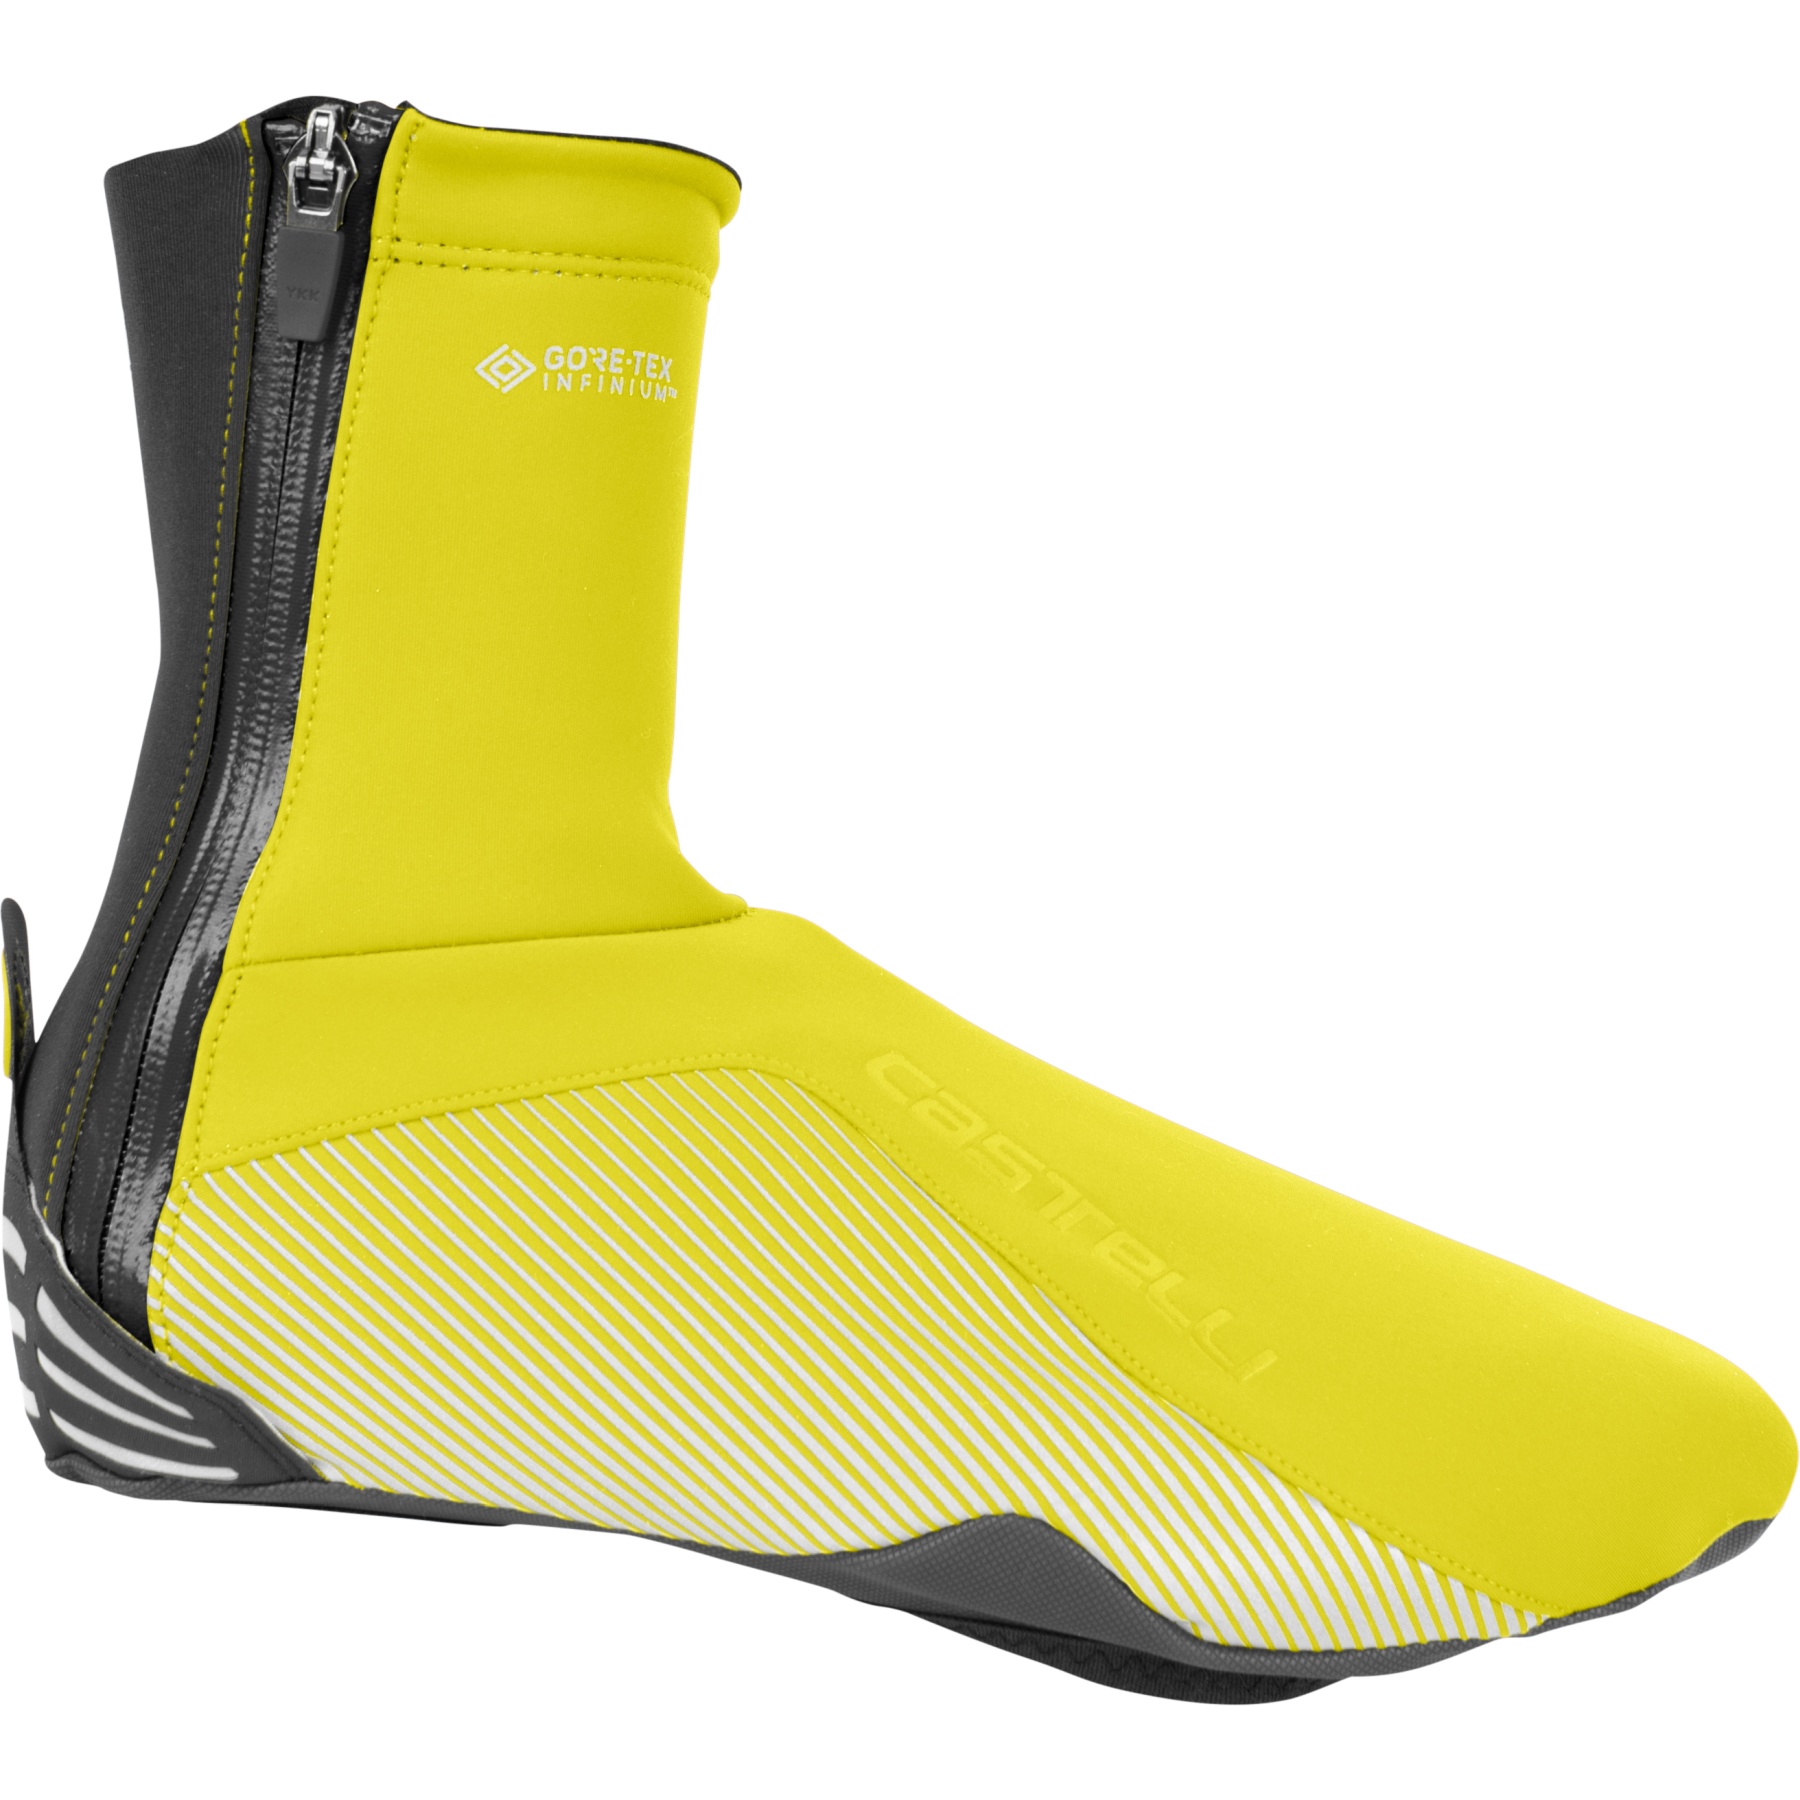 Image of Castelli Dinamica Shoecover Women's - brilliant yellow 790